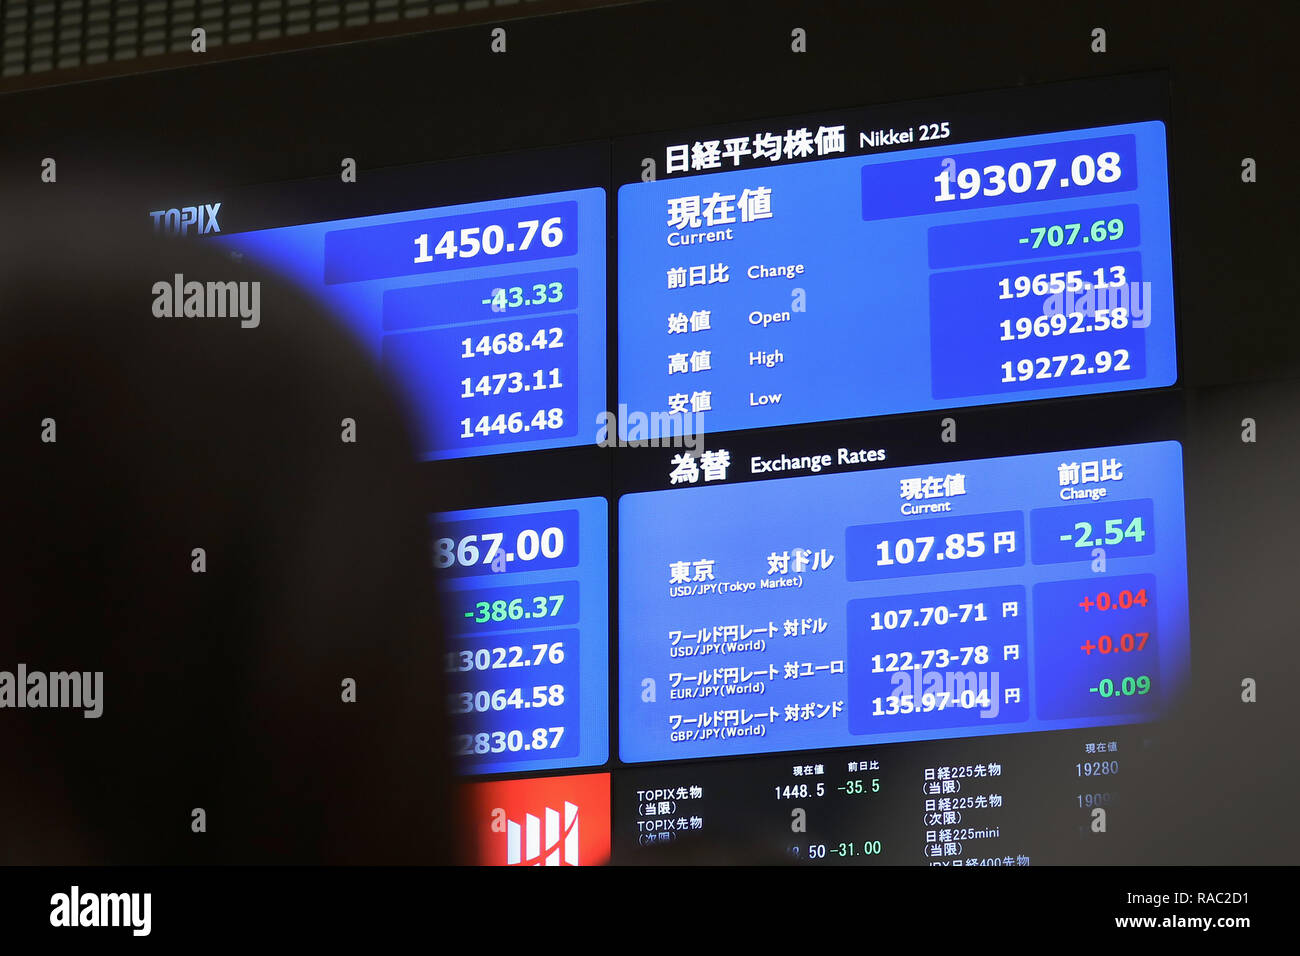 Tokyo, Japan. 4th Jan, 2019. People look at an electronic board displaying stock prices at the Tokyo Stock Exchange in Tokyo, Japan, Jan. 4, 2019. Tokyo stocks opened sharply lower on Friday, with the benchmark Nikkei stock index tracking an equities rout on Wall Street overnight sparked by Apple Inc. lowering its sales outlook and concerns about a global economic slowdown. Credit: Du Xiaoyi/Xinhua/Alamy Live News Stock Photo